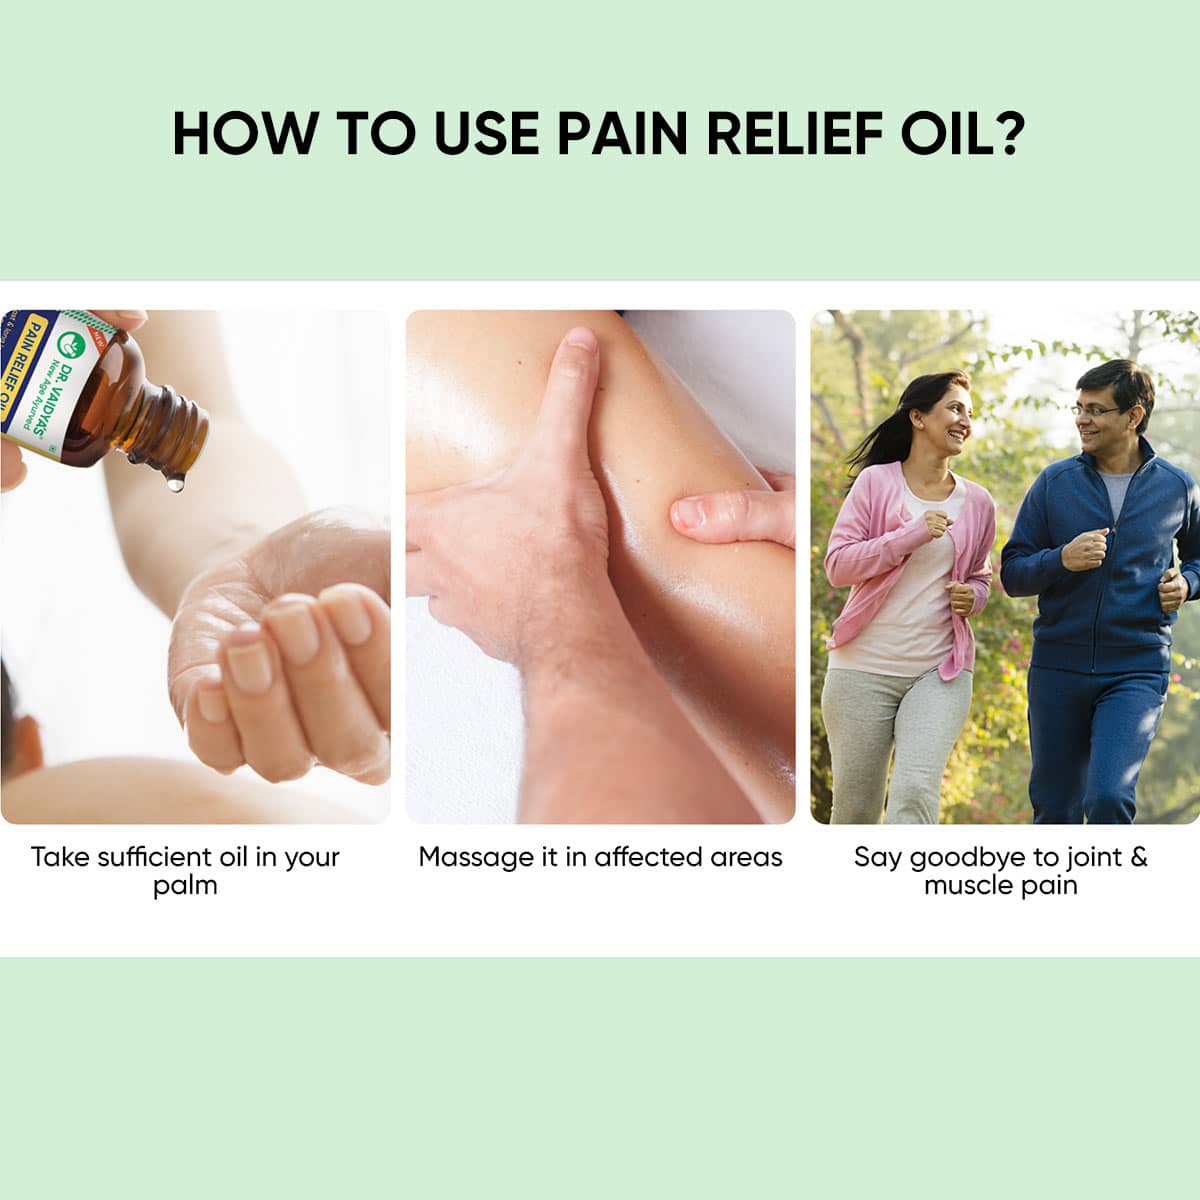 Dr. Vaidya's Pain Relief Oil with Nirgundi for Joint & Muscles Pain